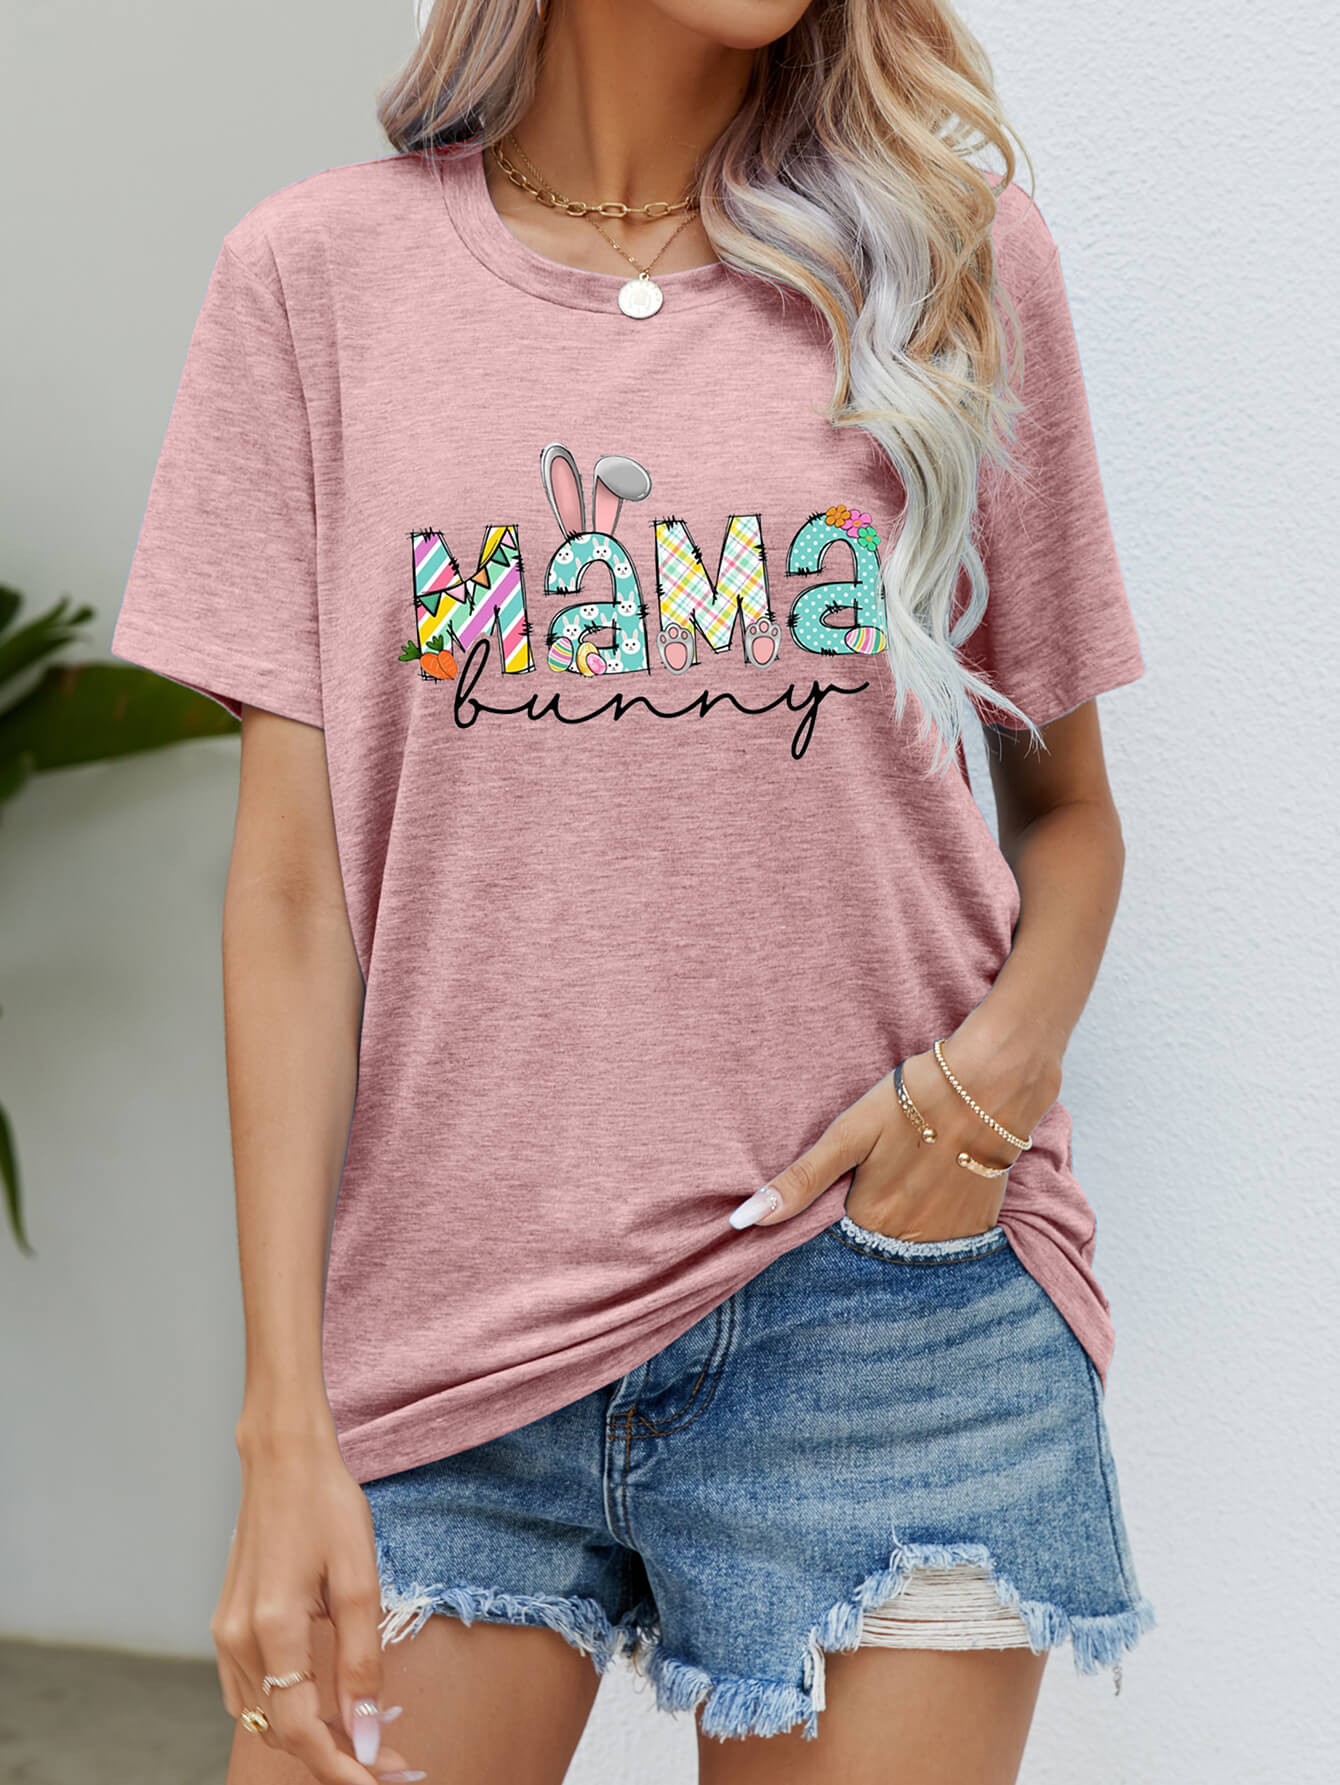 MAMA BUNNY Easter Graphic Tee (6 Colors)  Krazy Heart Designs Boutique Dusty Pink S 